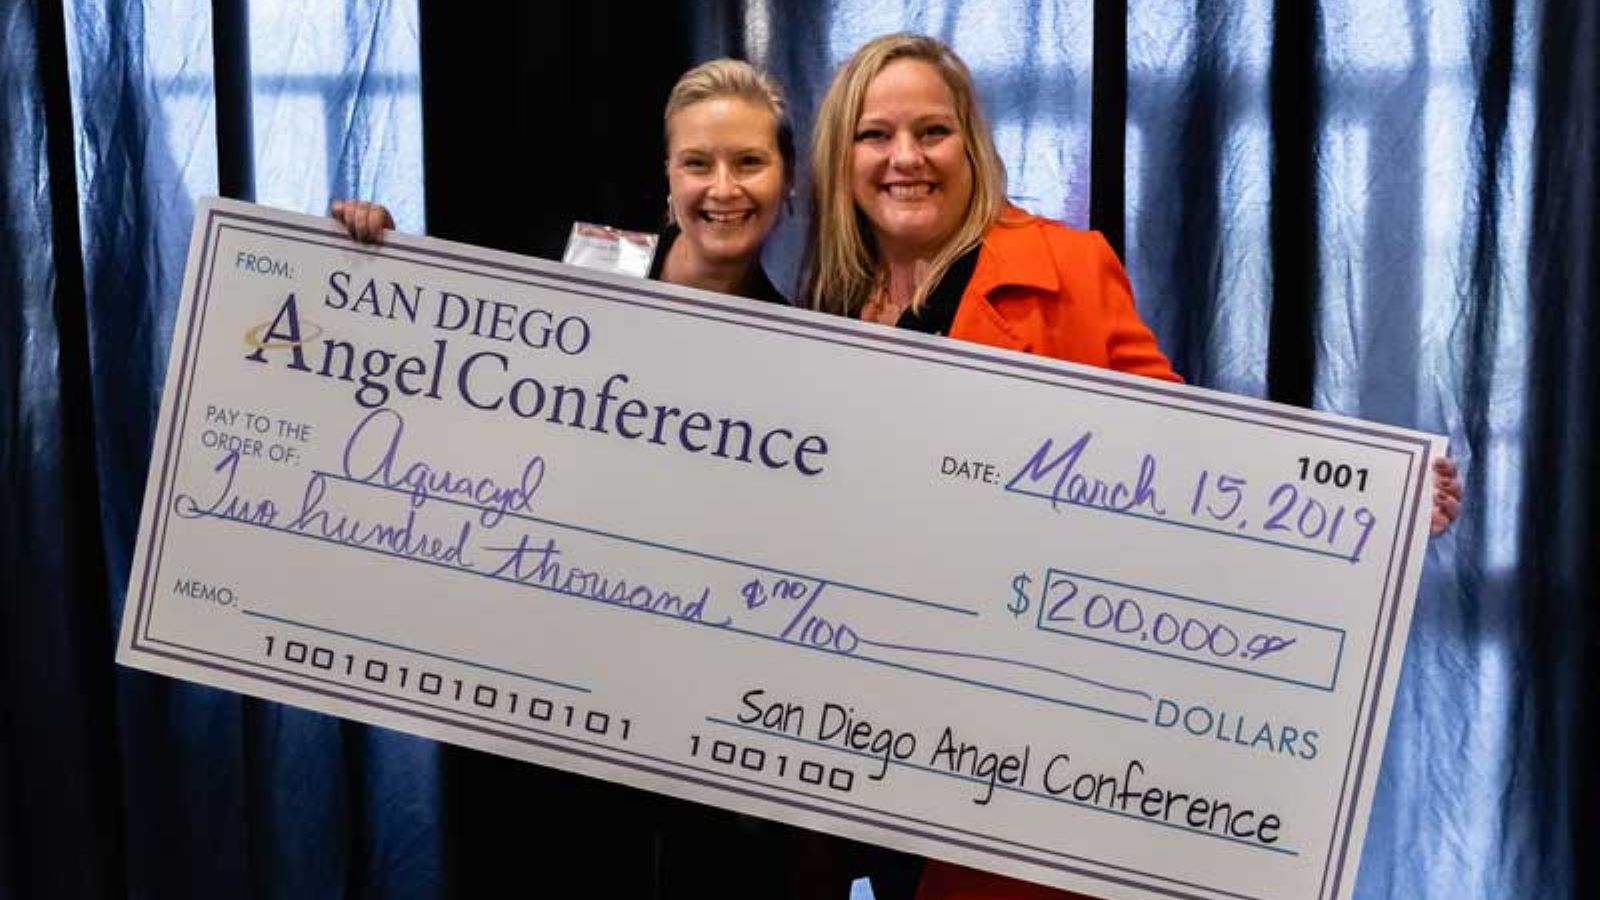 Recipient of check from the San Diego Angel Conference at The Brink SBDC